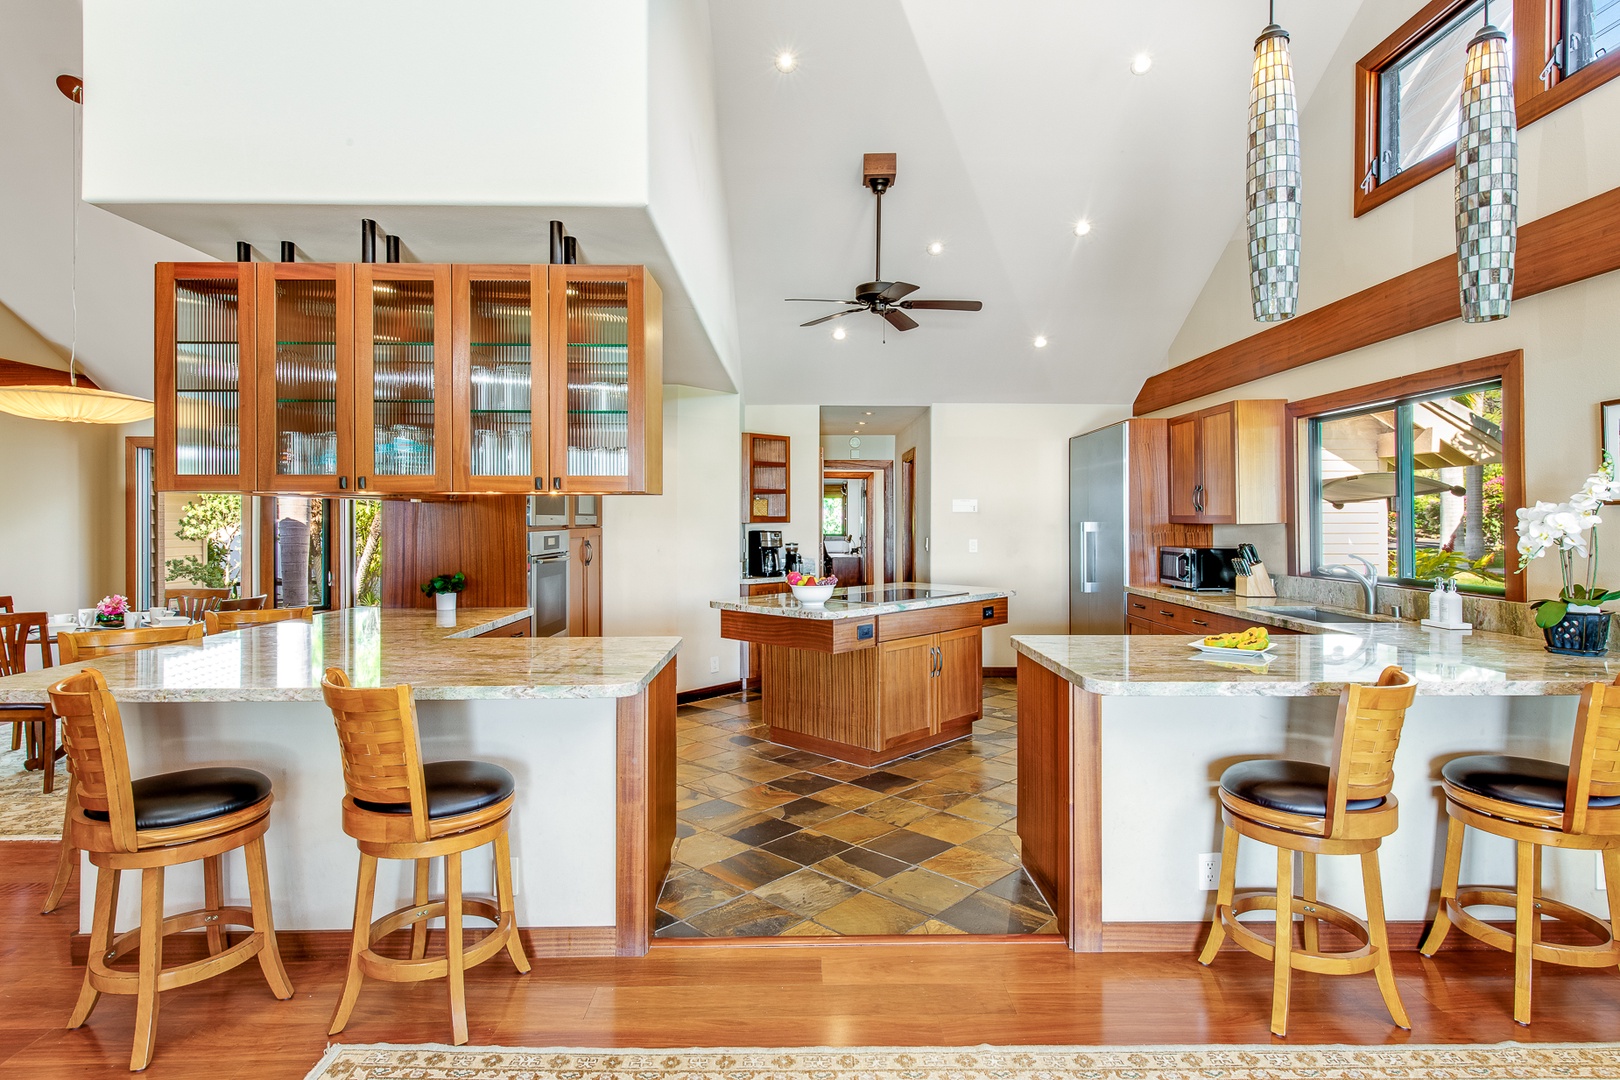 Kamuela Vacation Rentals, Olomana Hale at Kohala Ranch - The kitchen is outfitted with beautiful granite countertops and all stainless steel Miele appliances, a wine fridge, a large central island, and two breakfast bars with six bar stools for entertaining during mealtimes